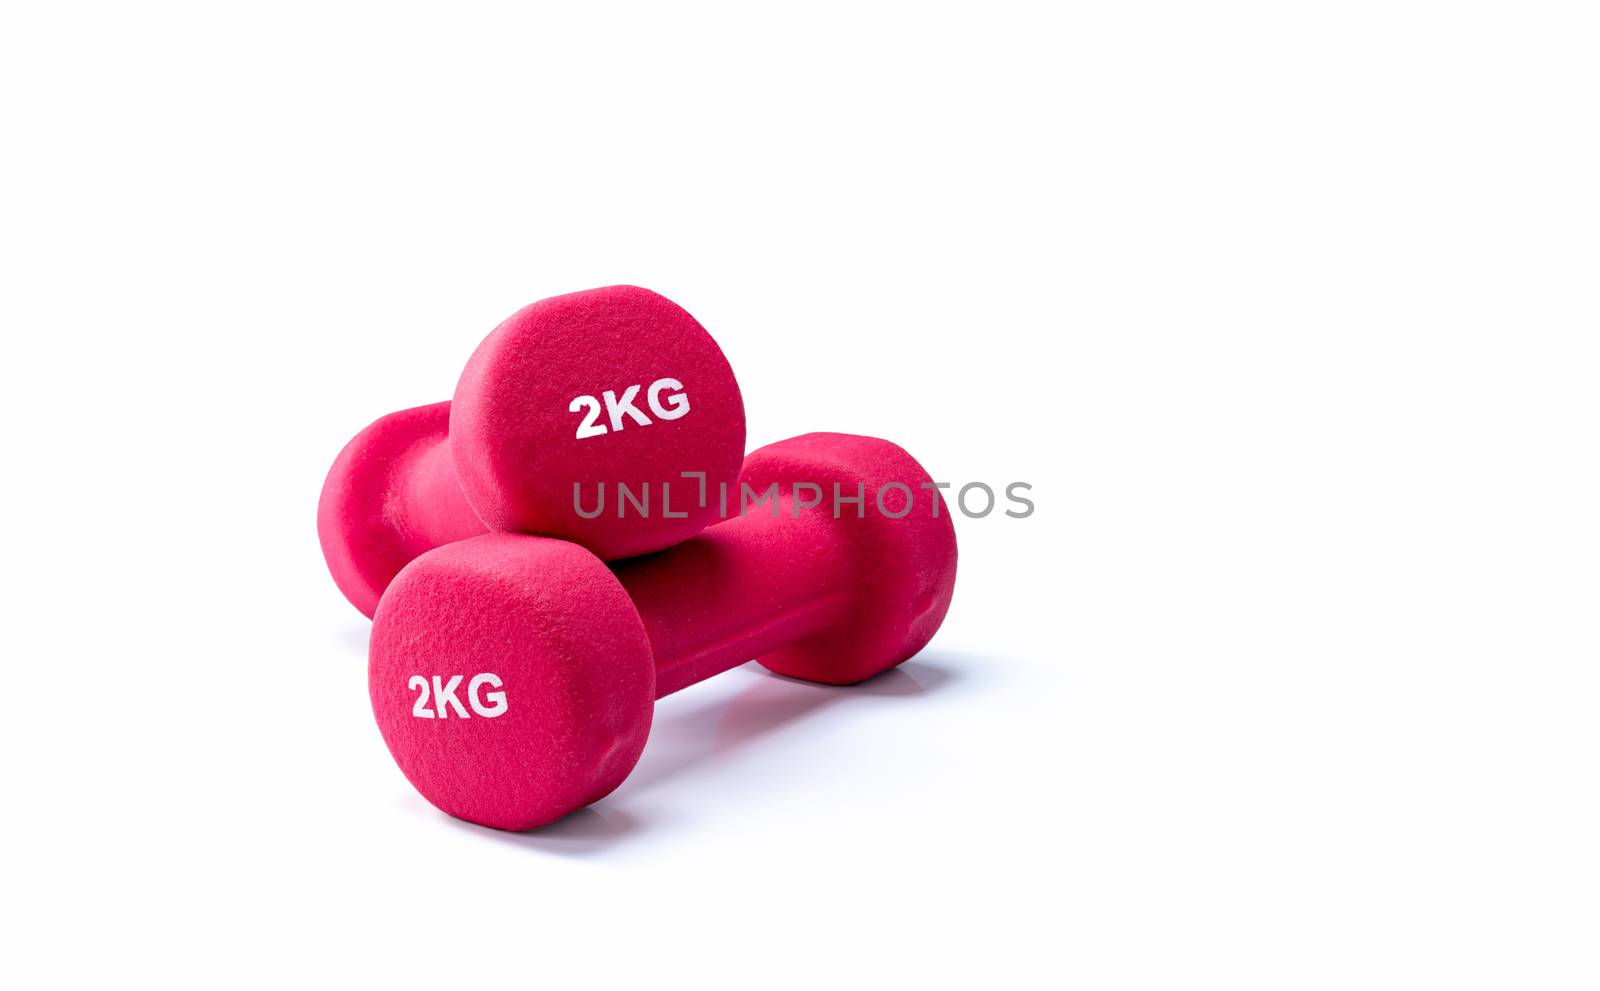 Set of red dumbbells isolated on white background. A pair of red by Fahroni